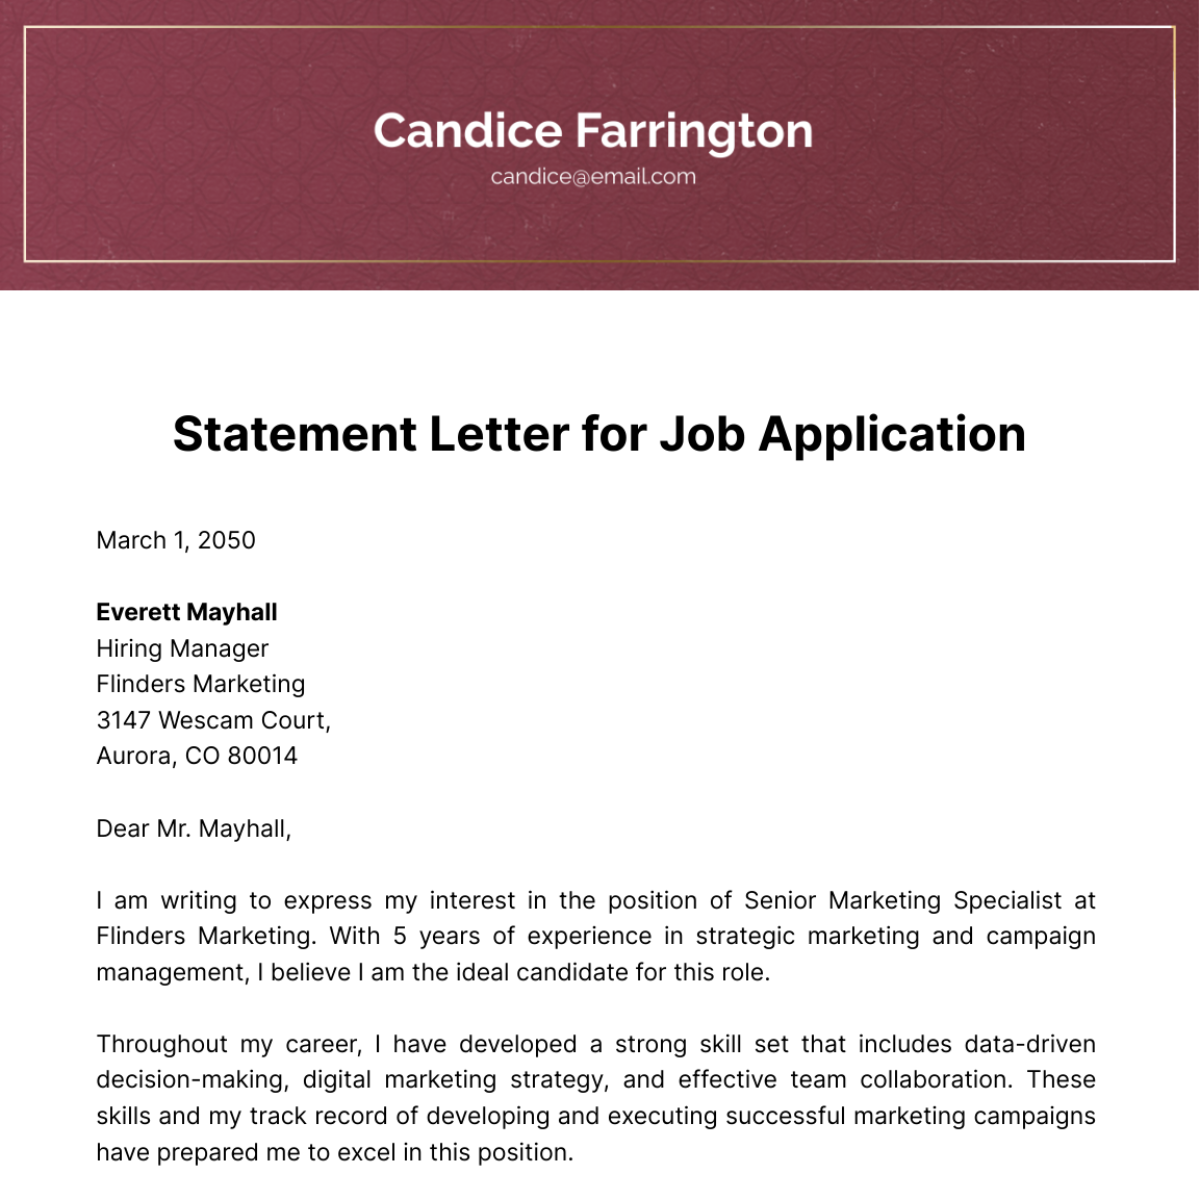 Free Statement Letter for Job Application Template